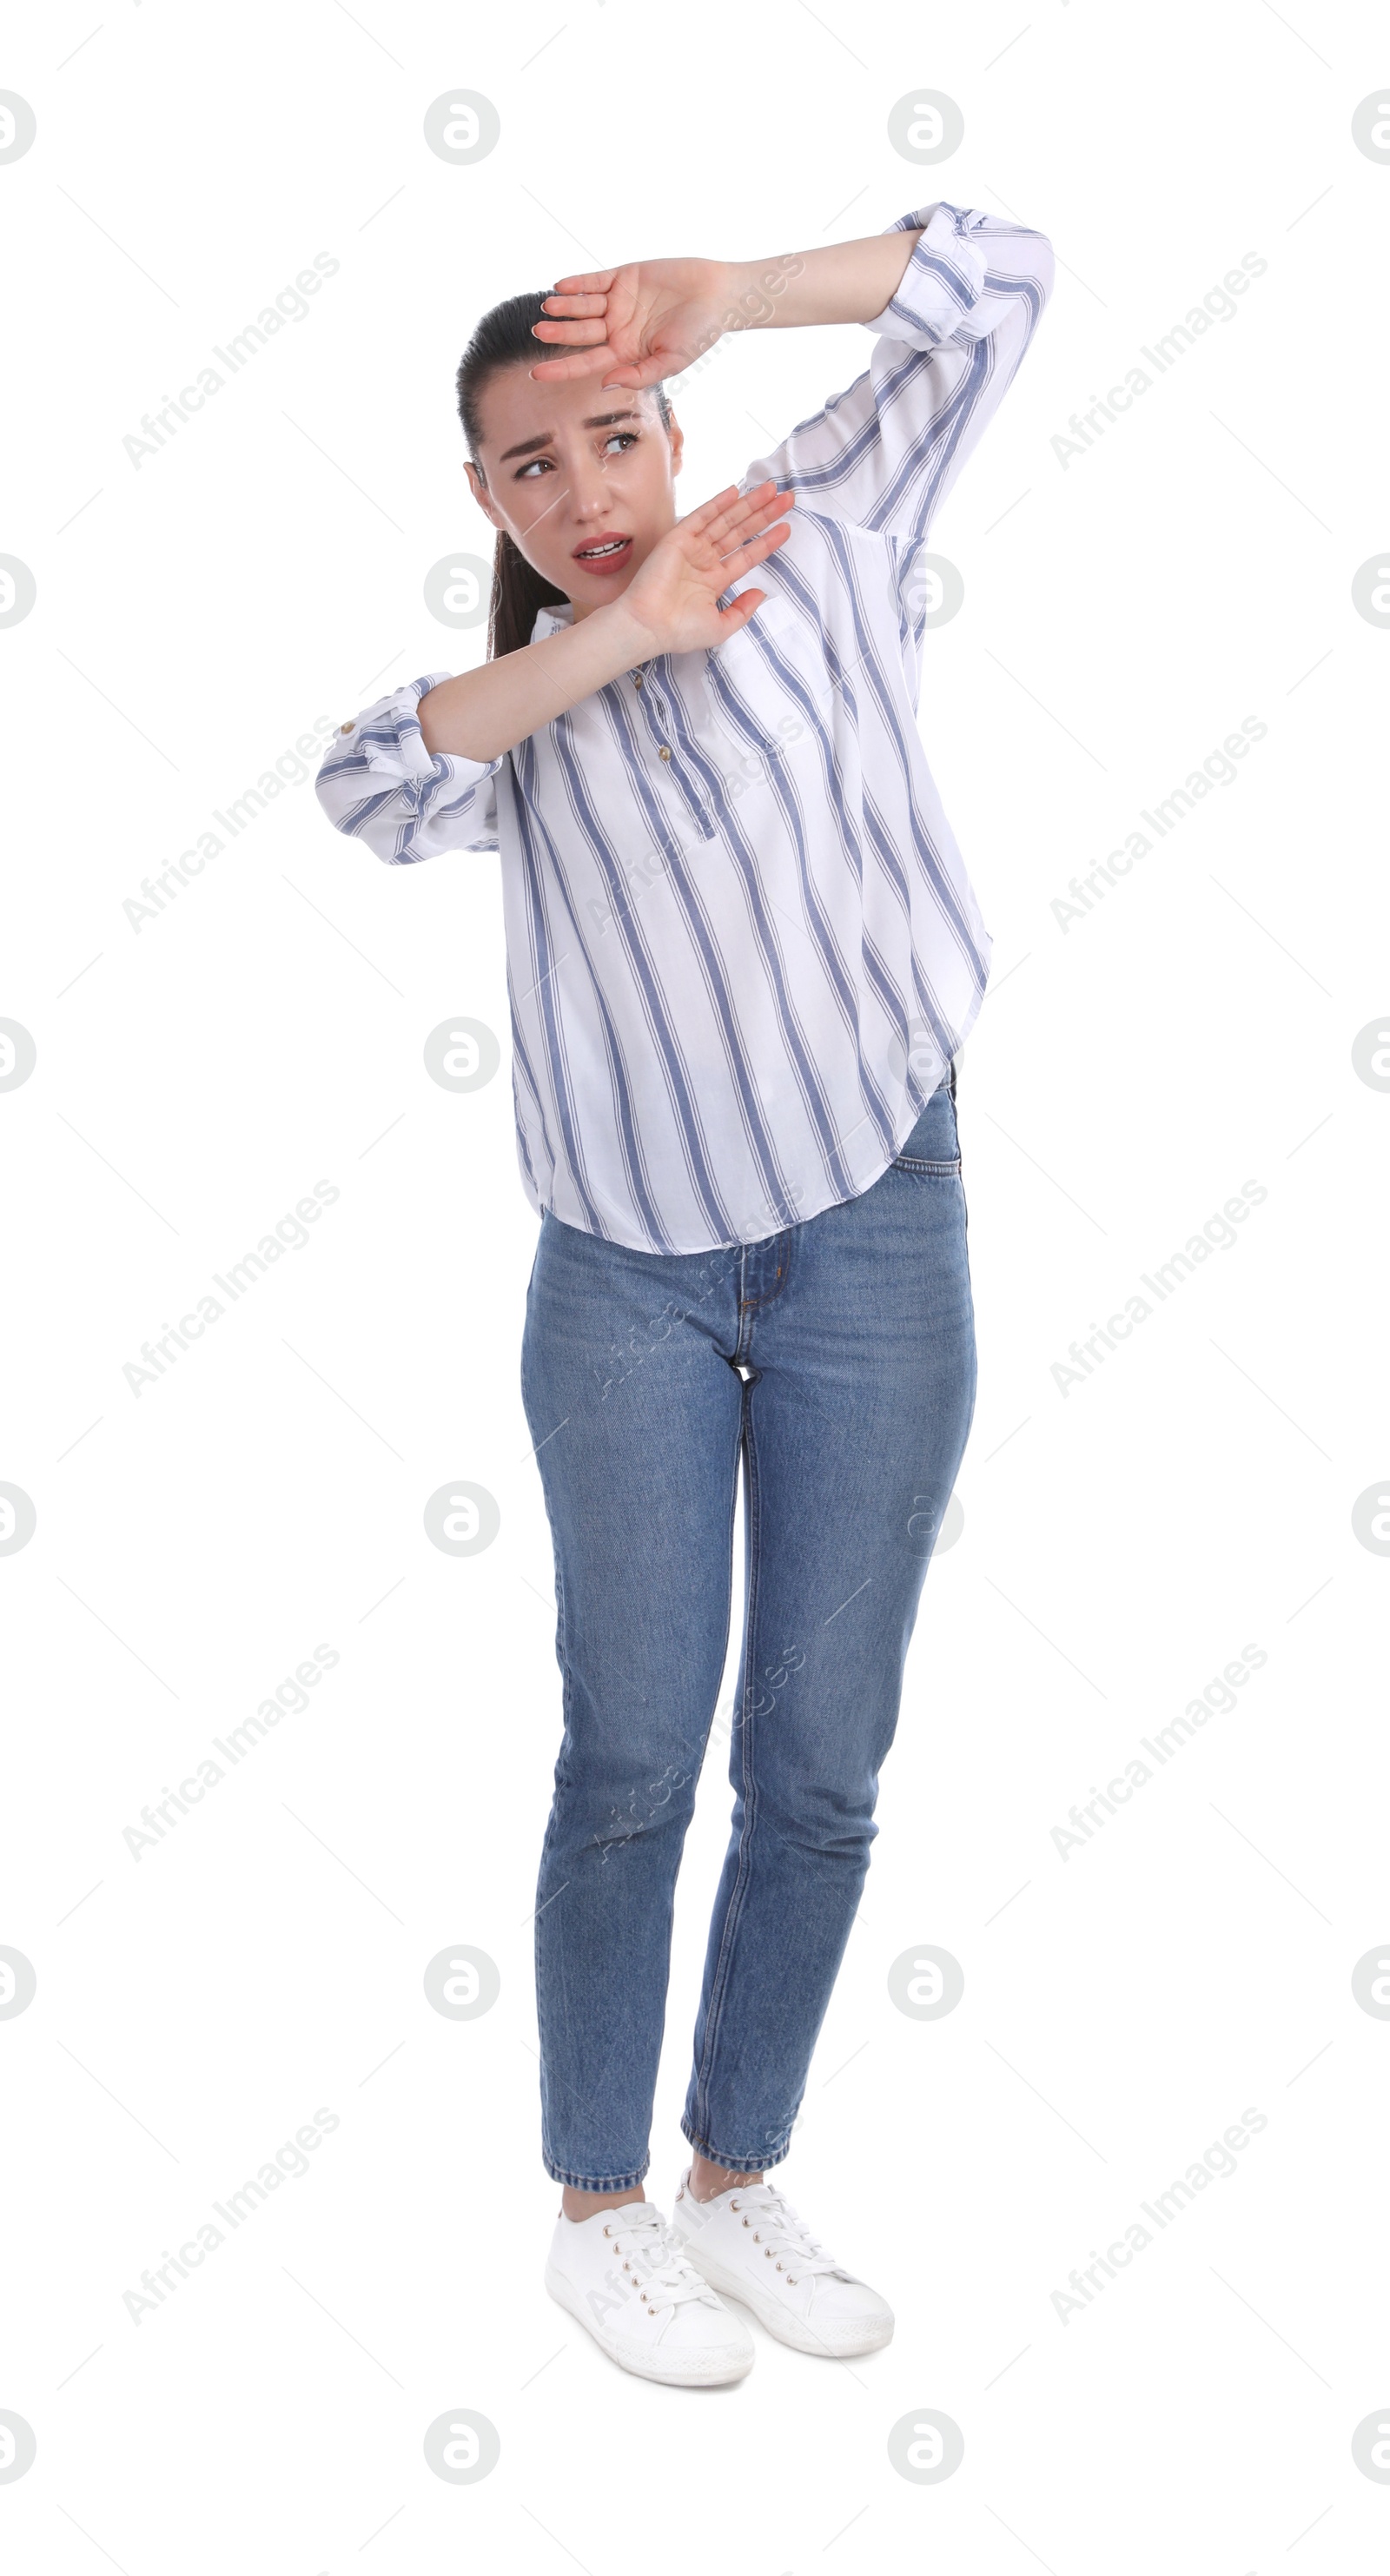 Photo of Scared woman holding hands in defensive manner on white background